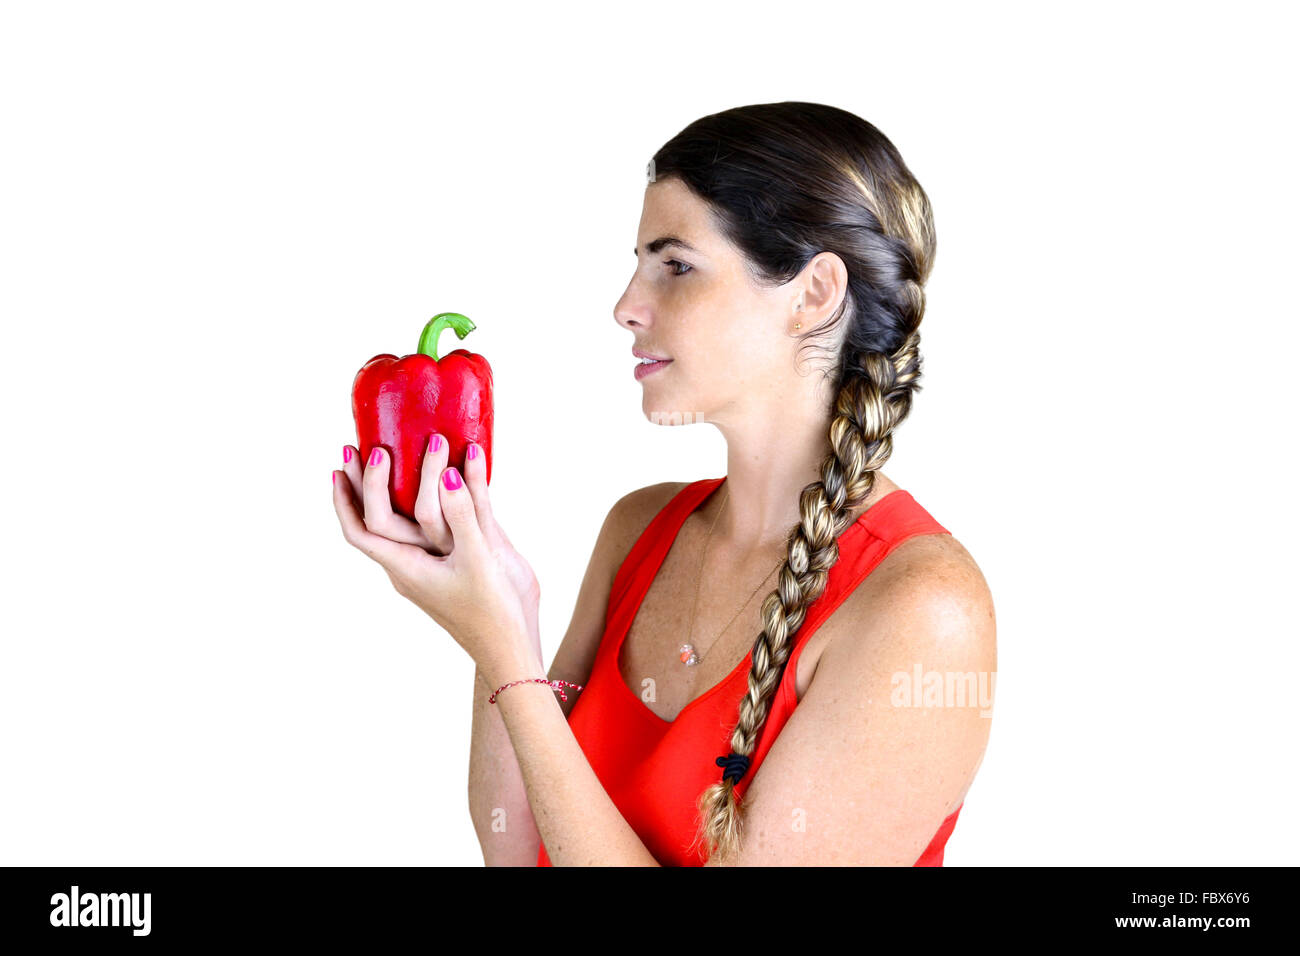 Love Peppers! Stock Photo